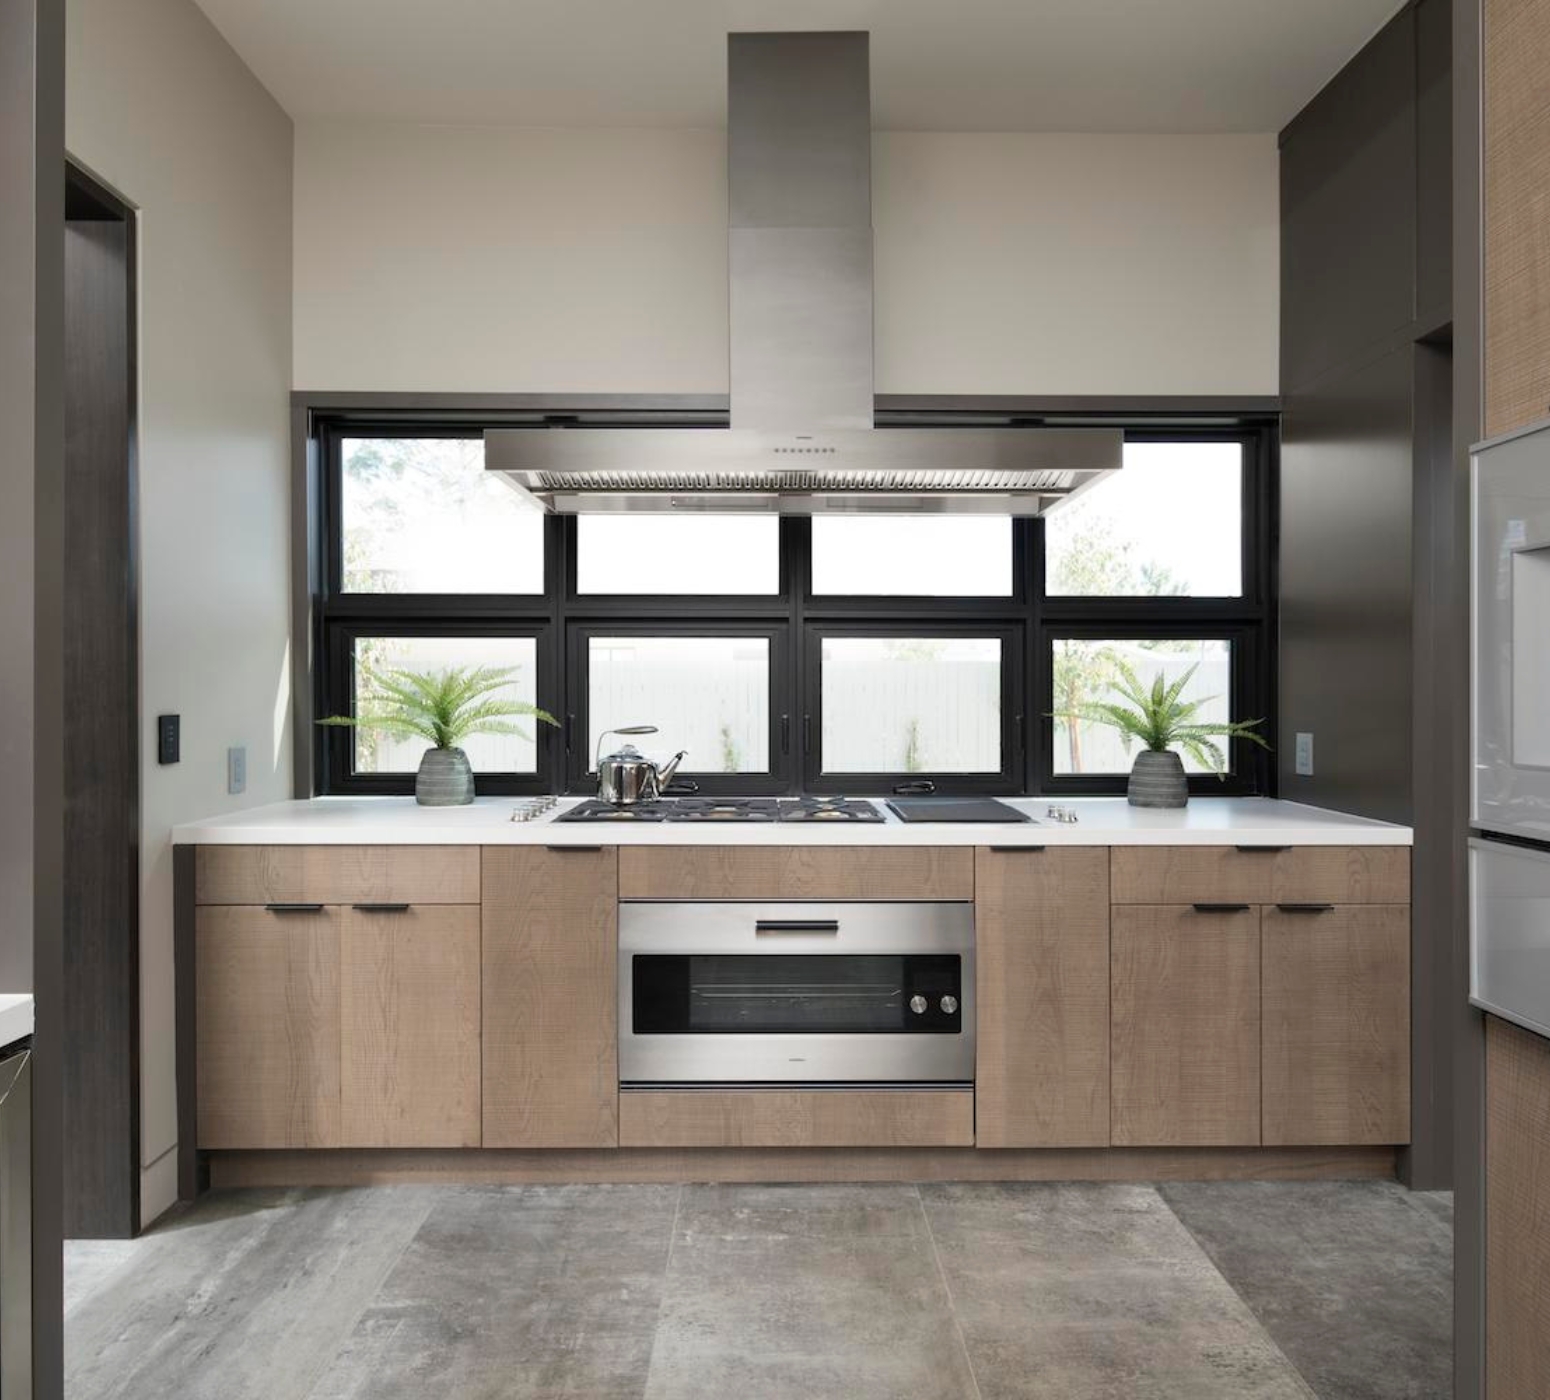 2019 The New American Remodel with the National Association of Home Builders in Las Vegas